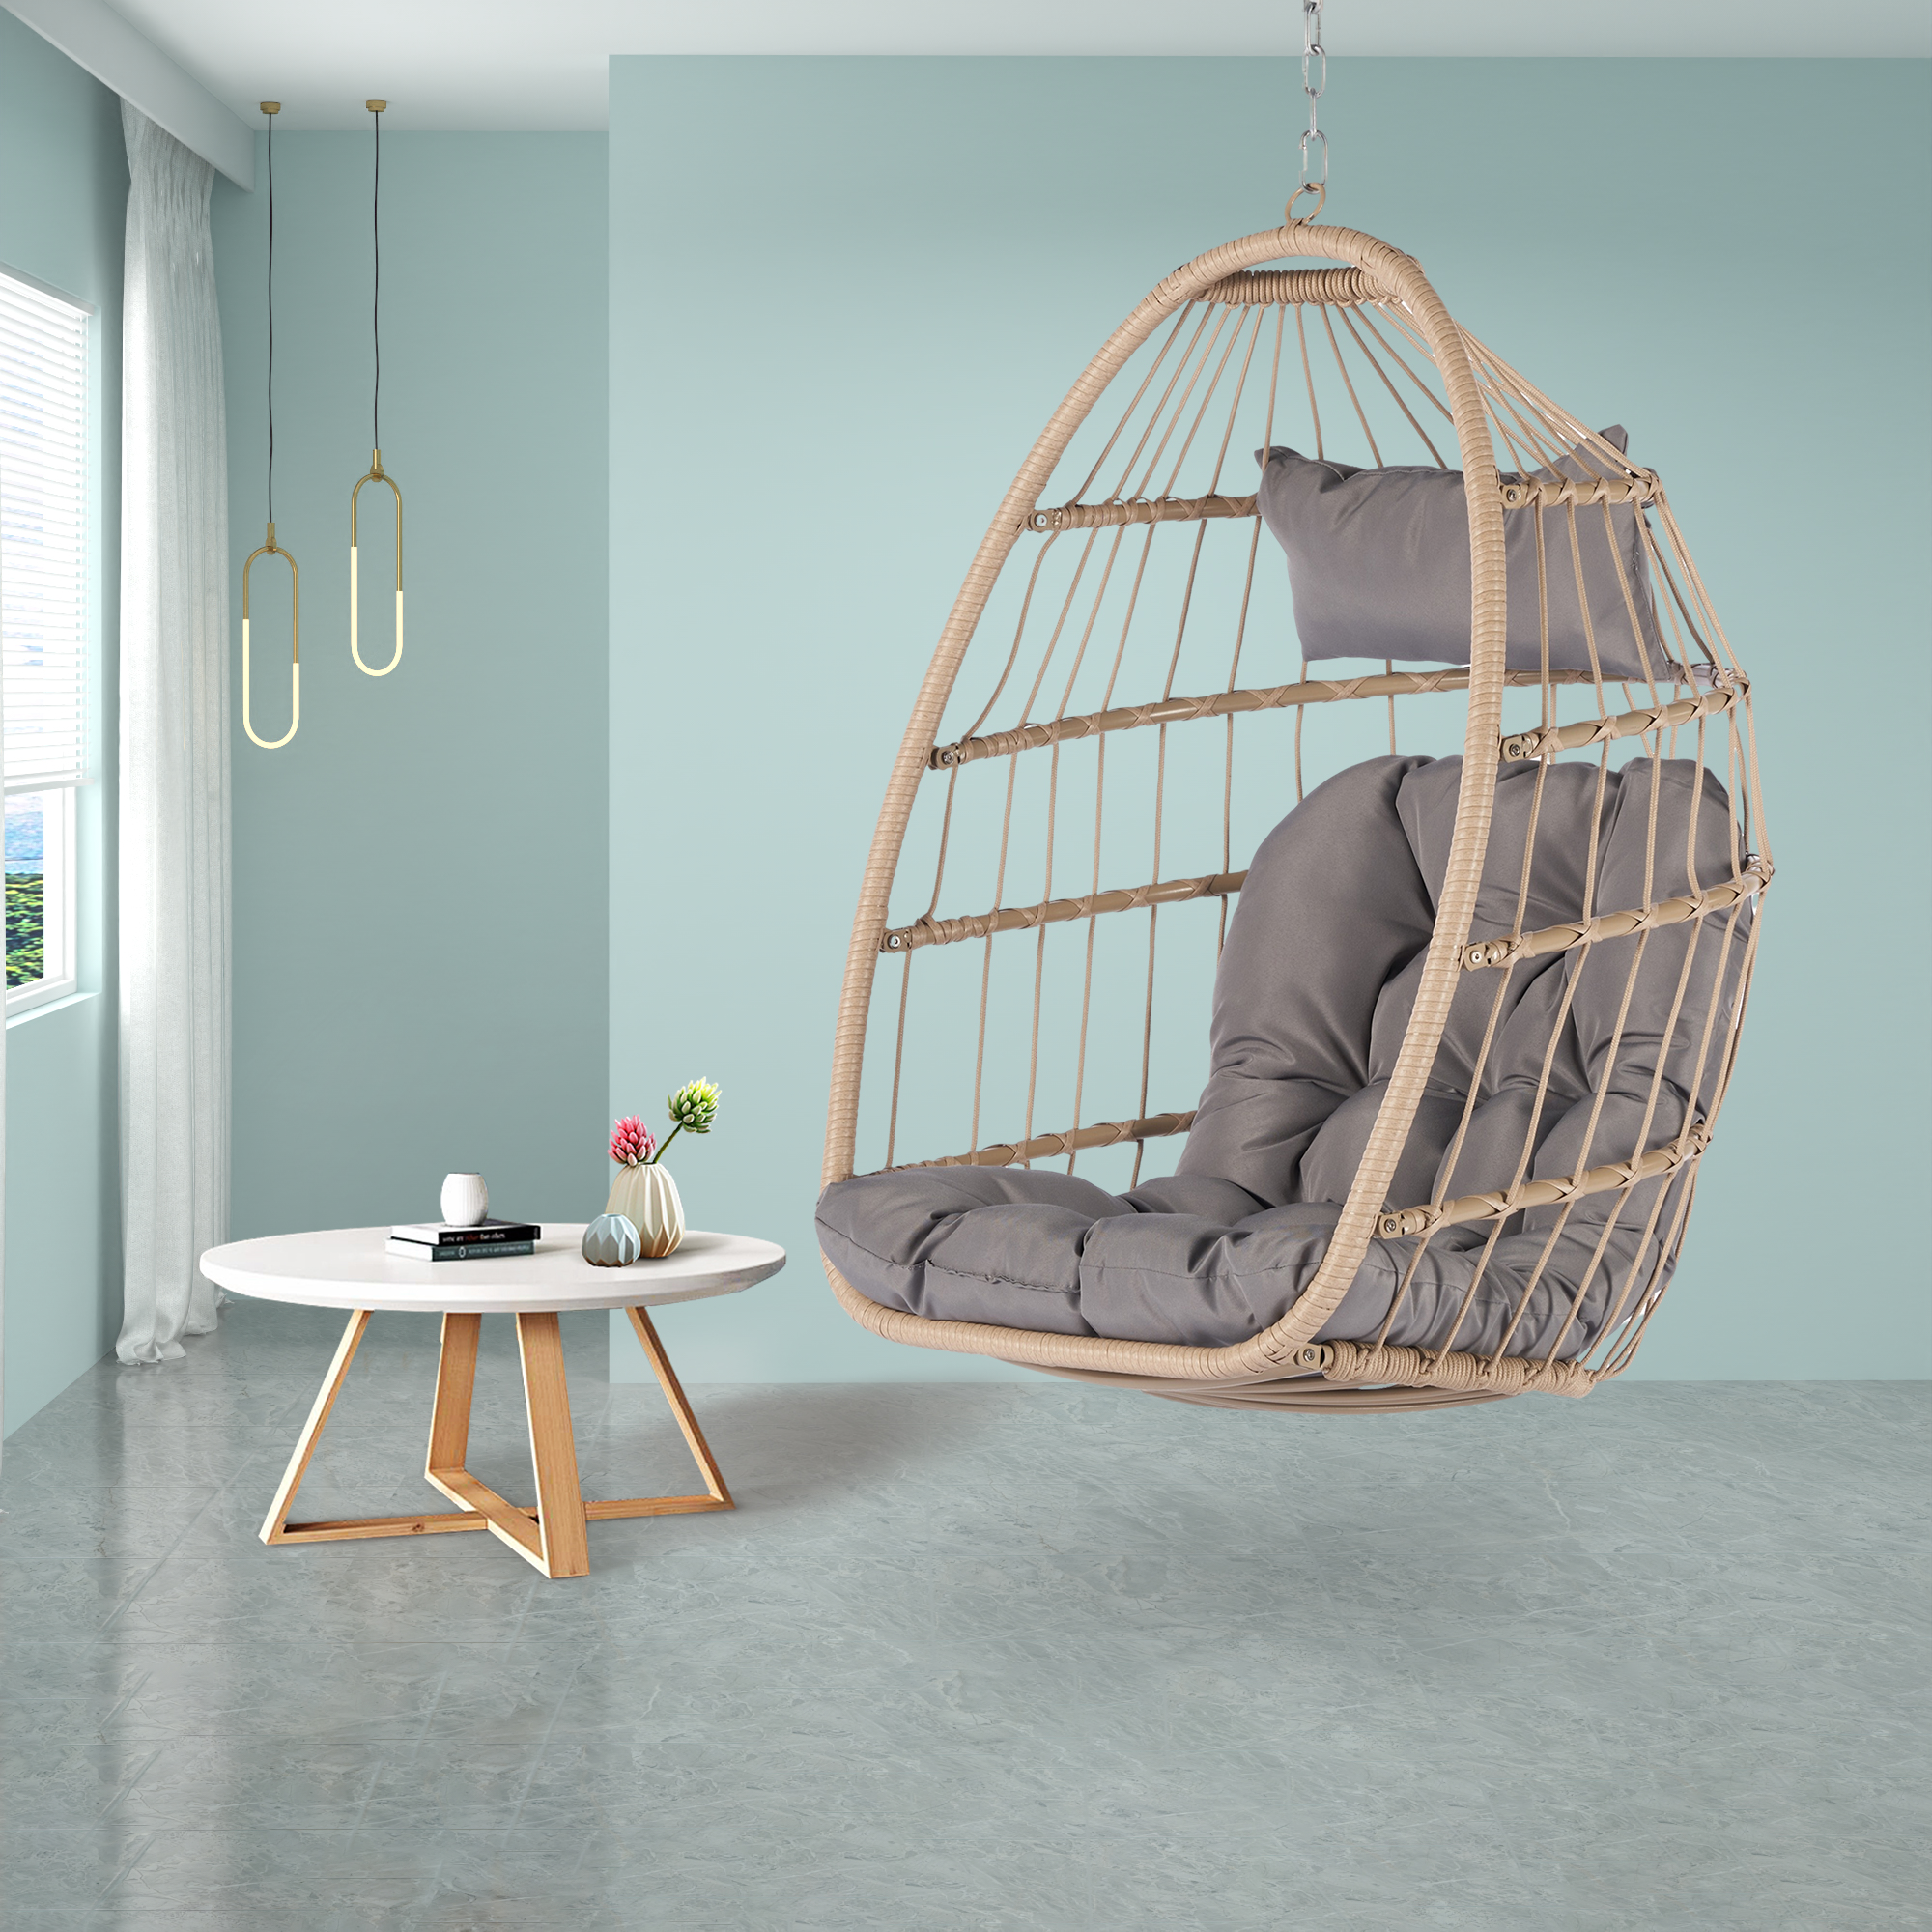 Patio Wicker Hanging Chair, Egg Chair Hammock Chair with UV Resistant Cushion and Pillow for Indoor Outdoor, Patio Backyard Balcony Lounge Rattan Swing Chair - image 5 of 6